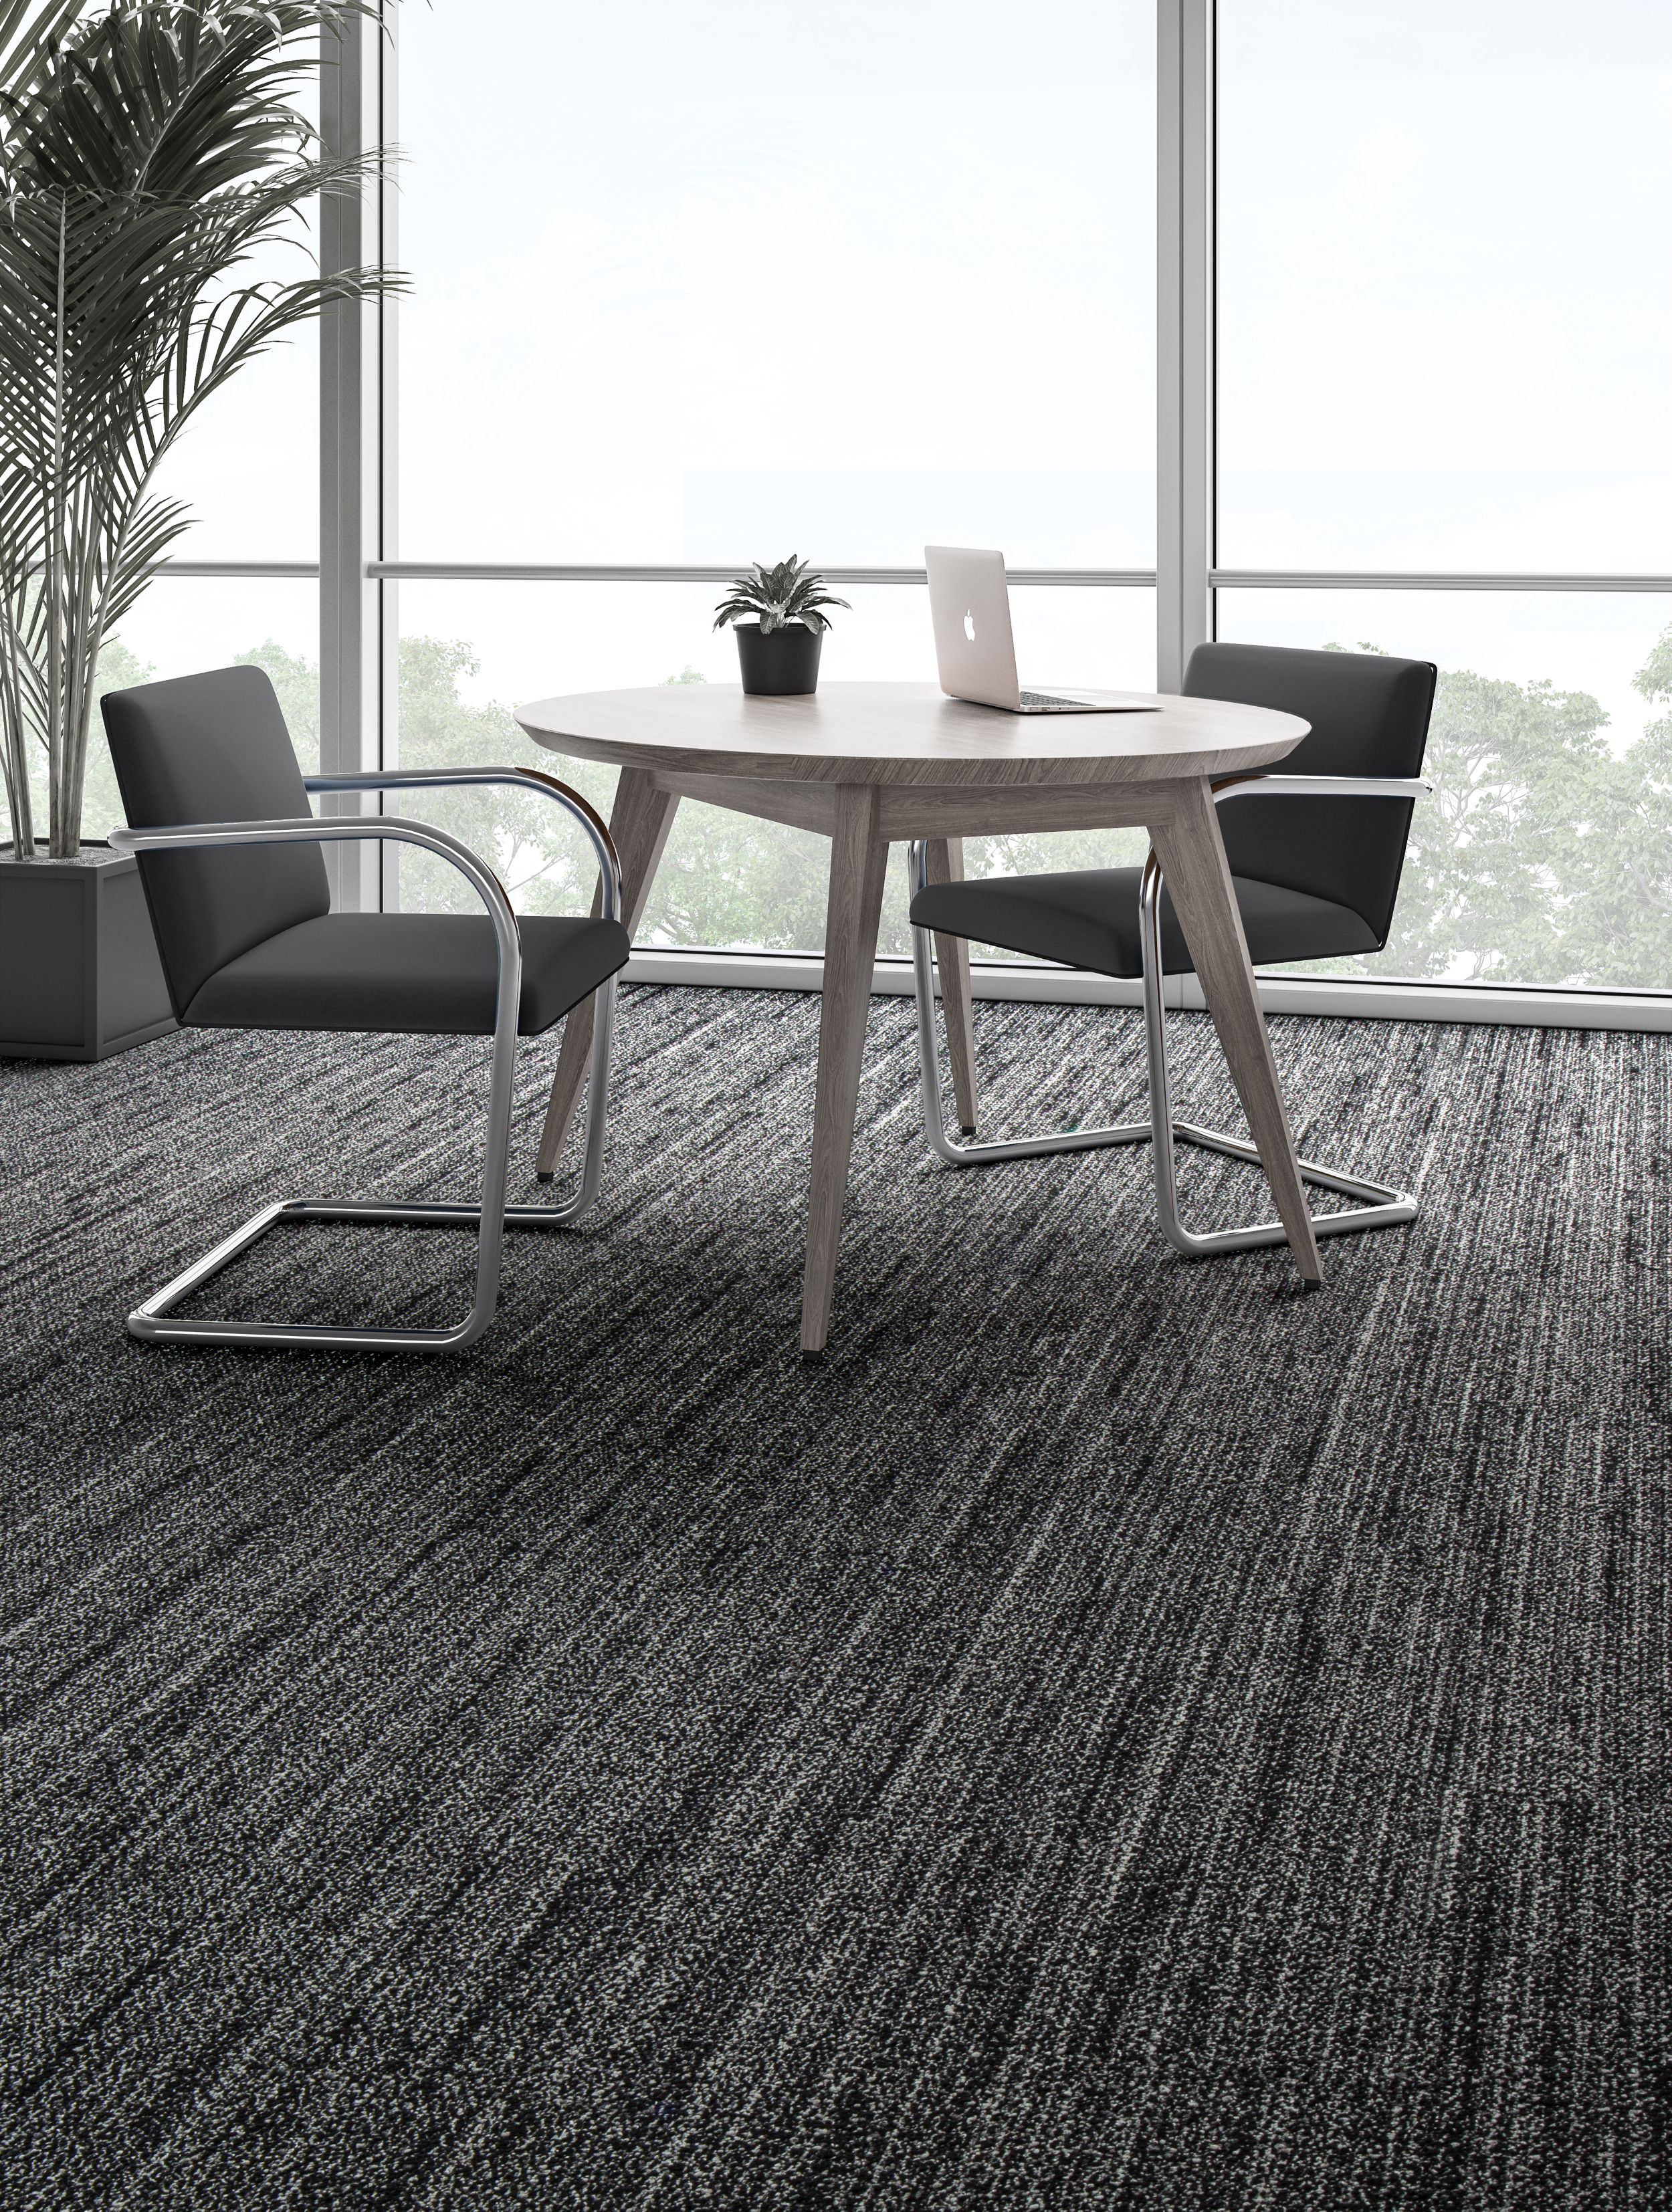 Interface WW870 plank carpet tile shown with small table and chairs afbeeldingnummer 8